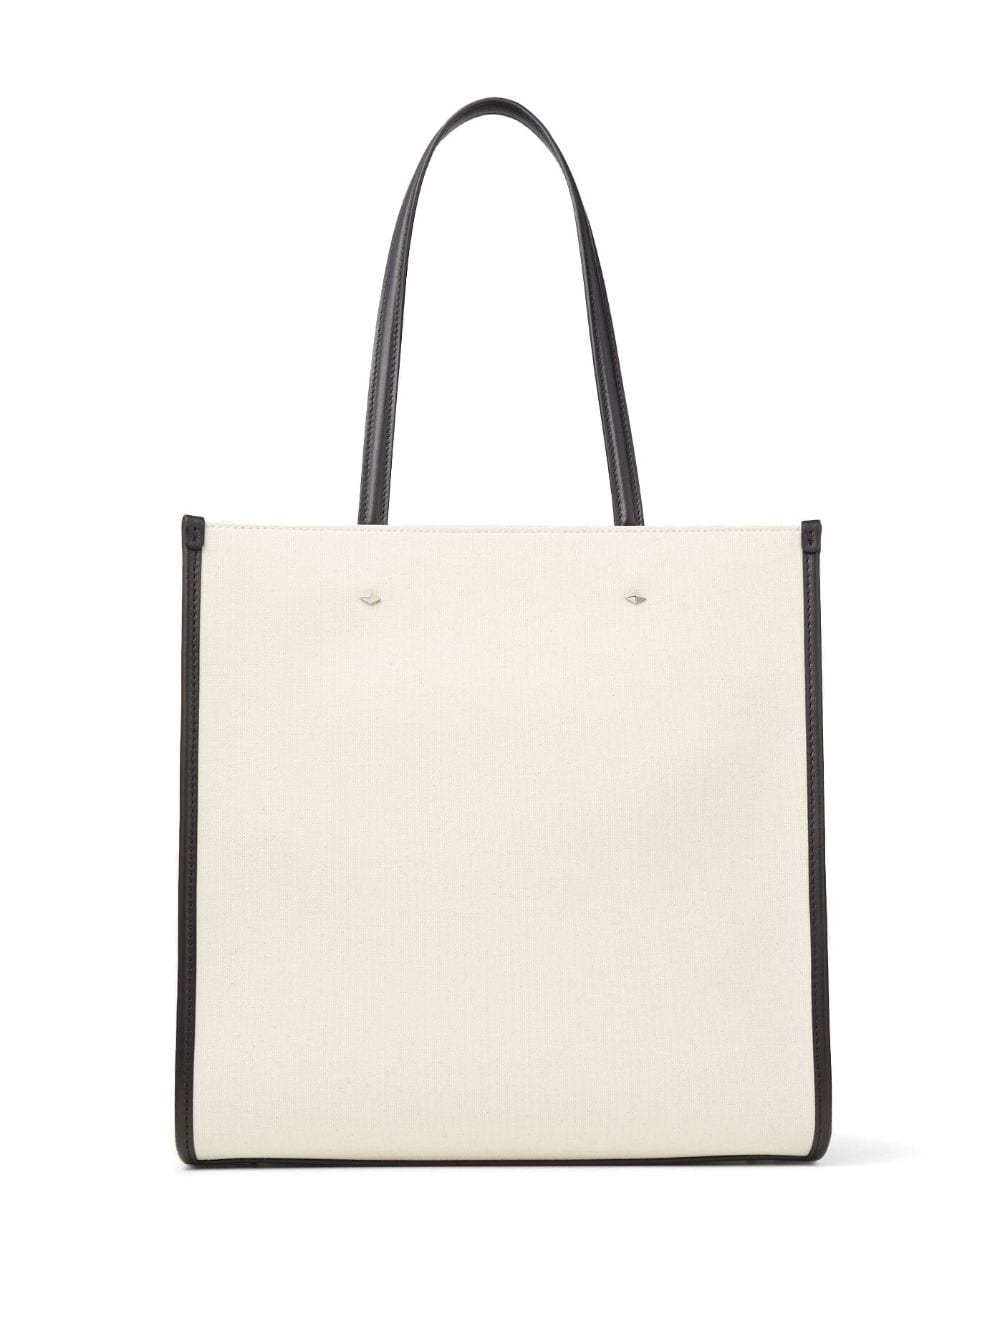 JIMMY CHOO Canvas Tote Bag in Nude & Neutrals for Women - FW23 Collection